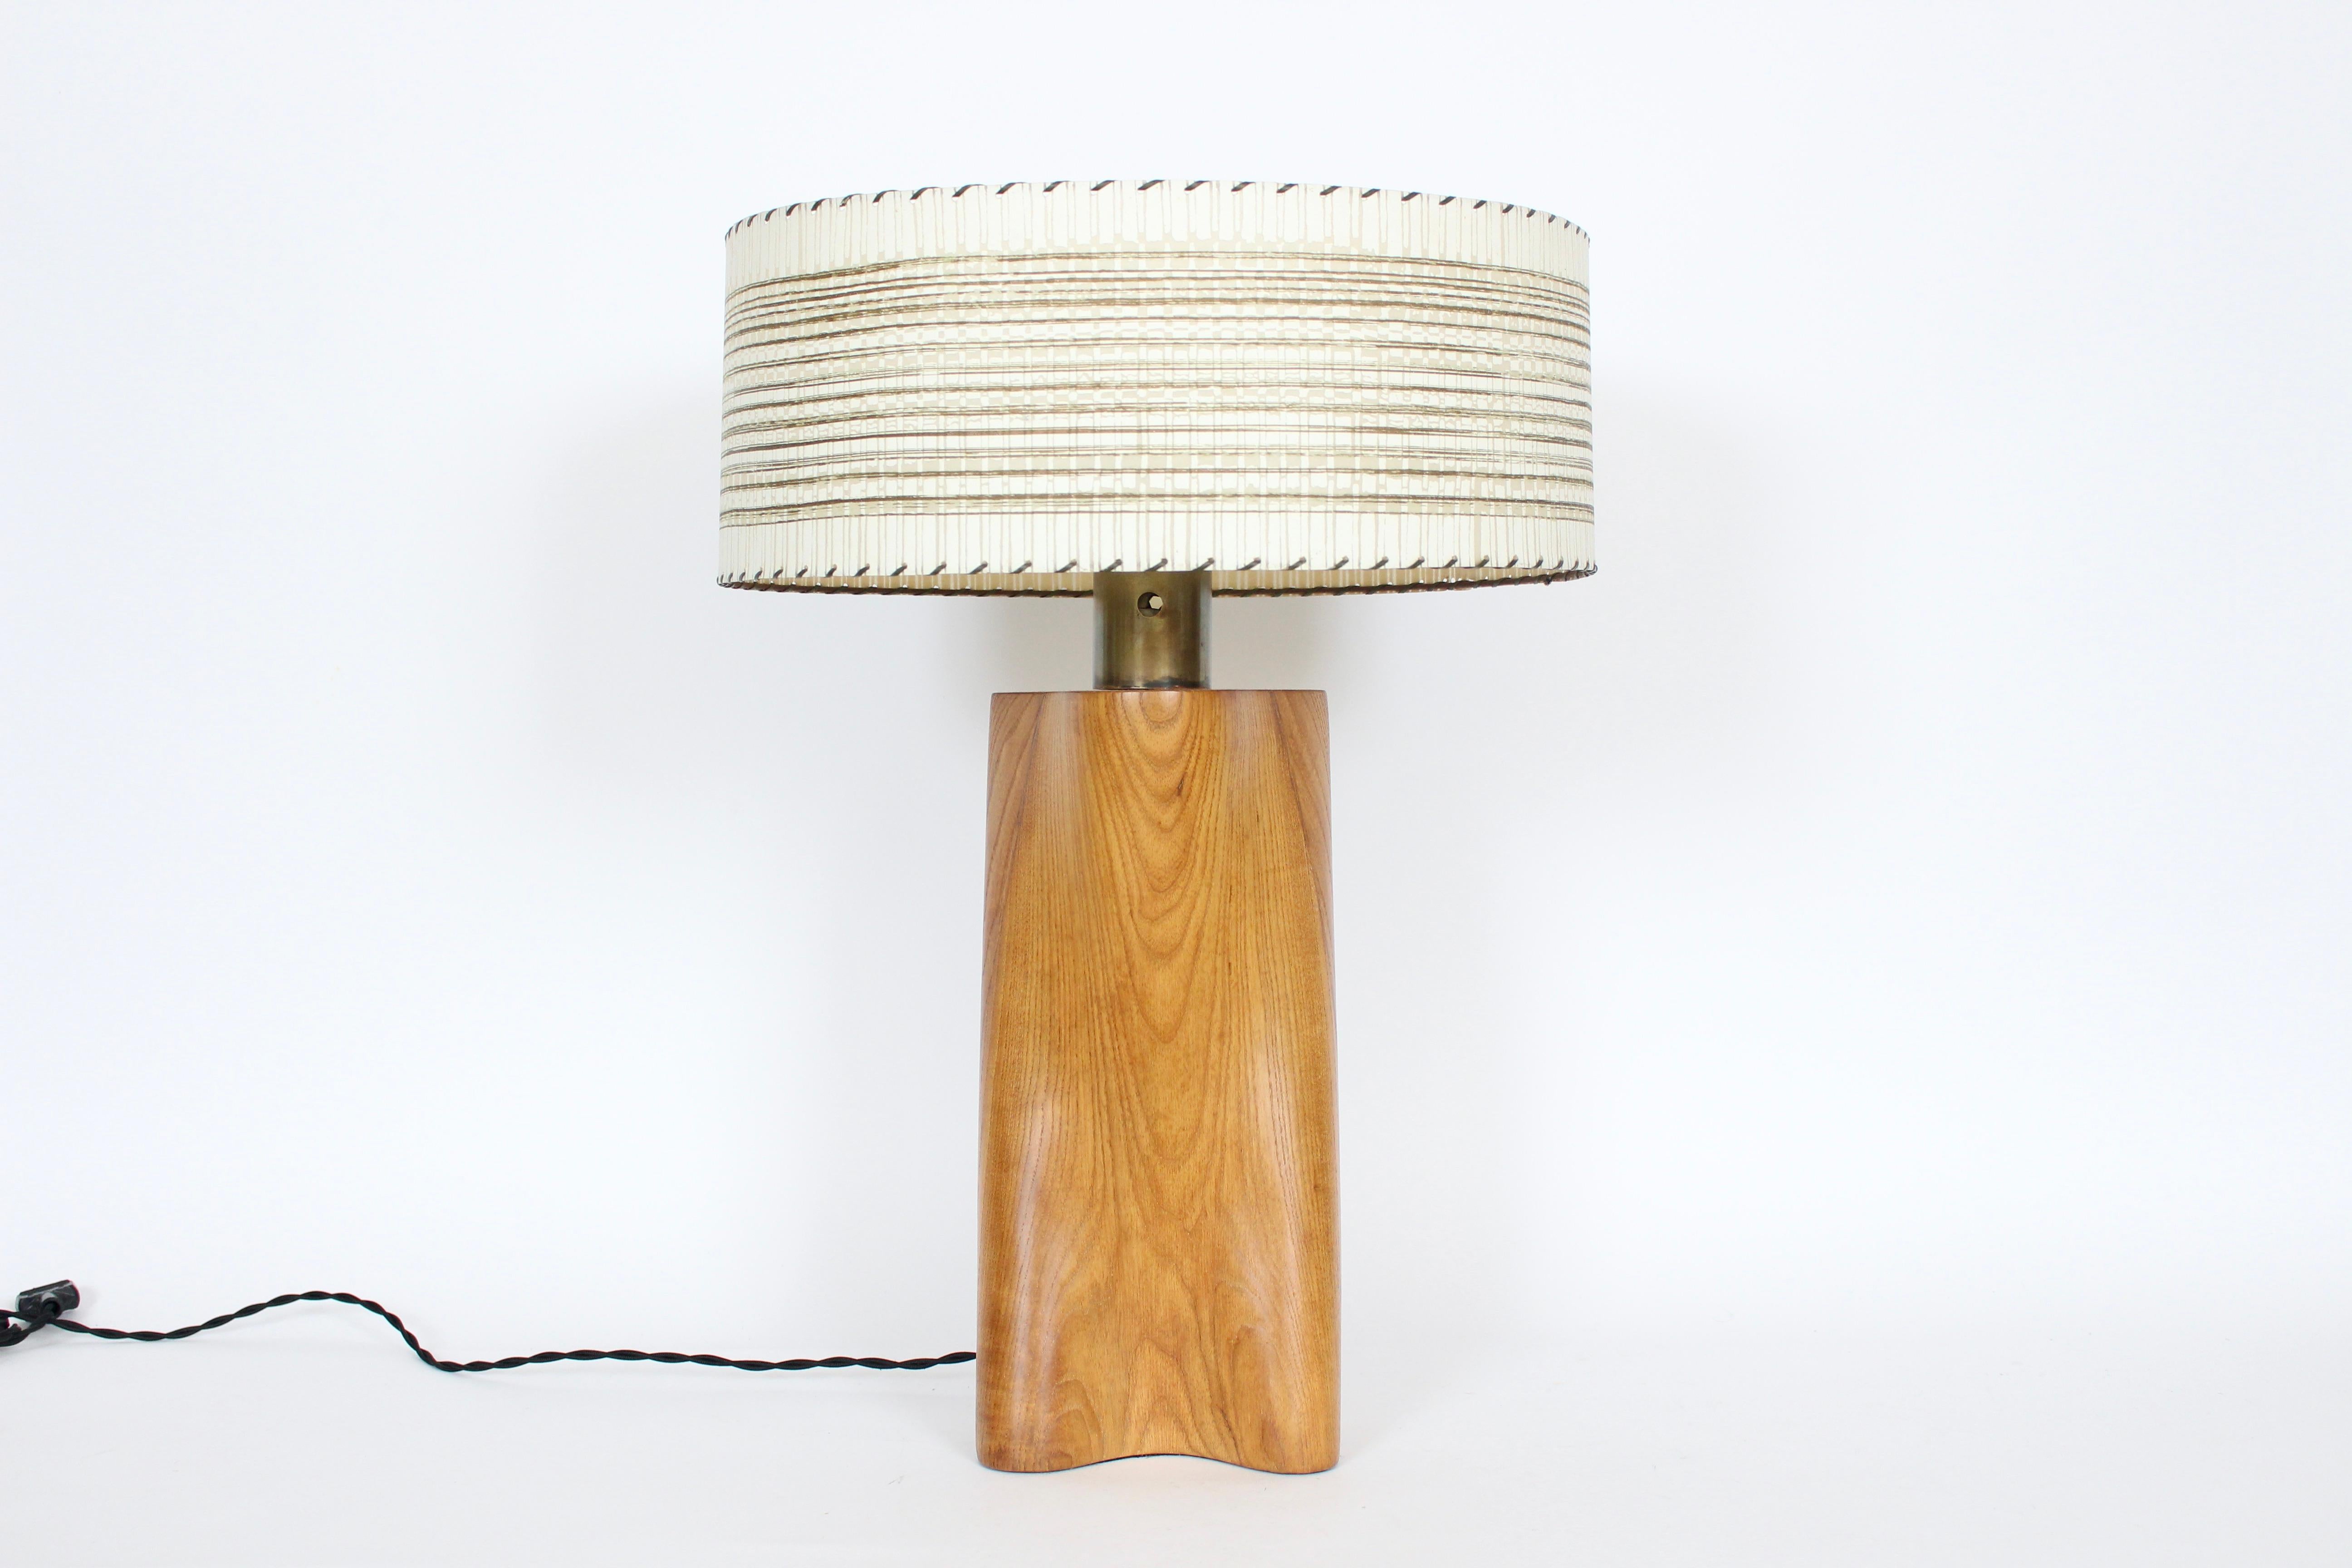 Yasha Heifetz Biomorphic Ash Table Lamp with Milk Glass Shade, 1940s In Good Condition For Sale In Bainbridge, NY